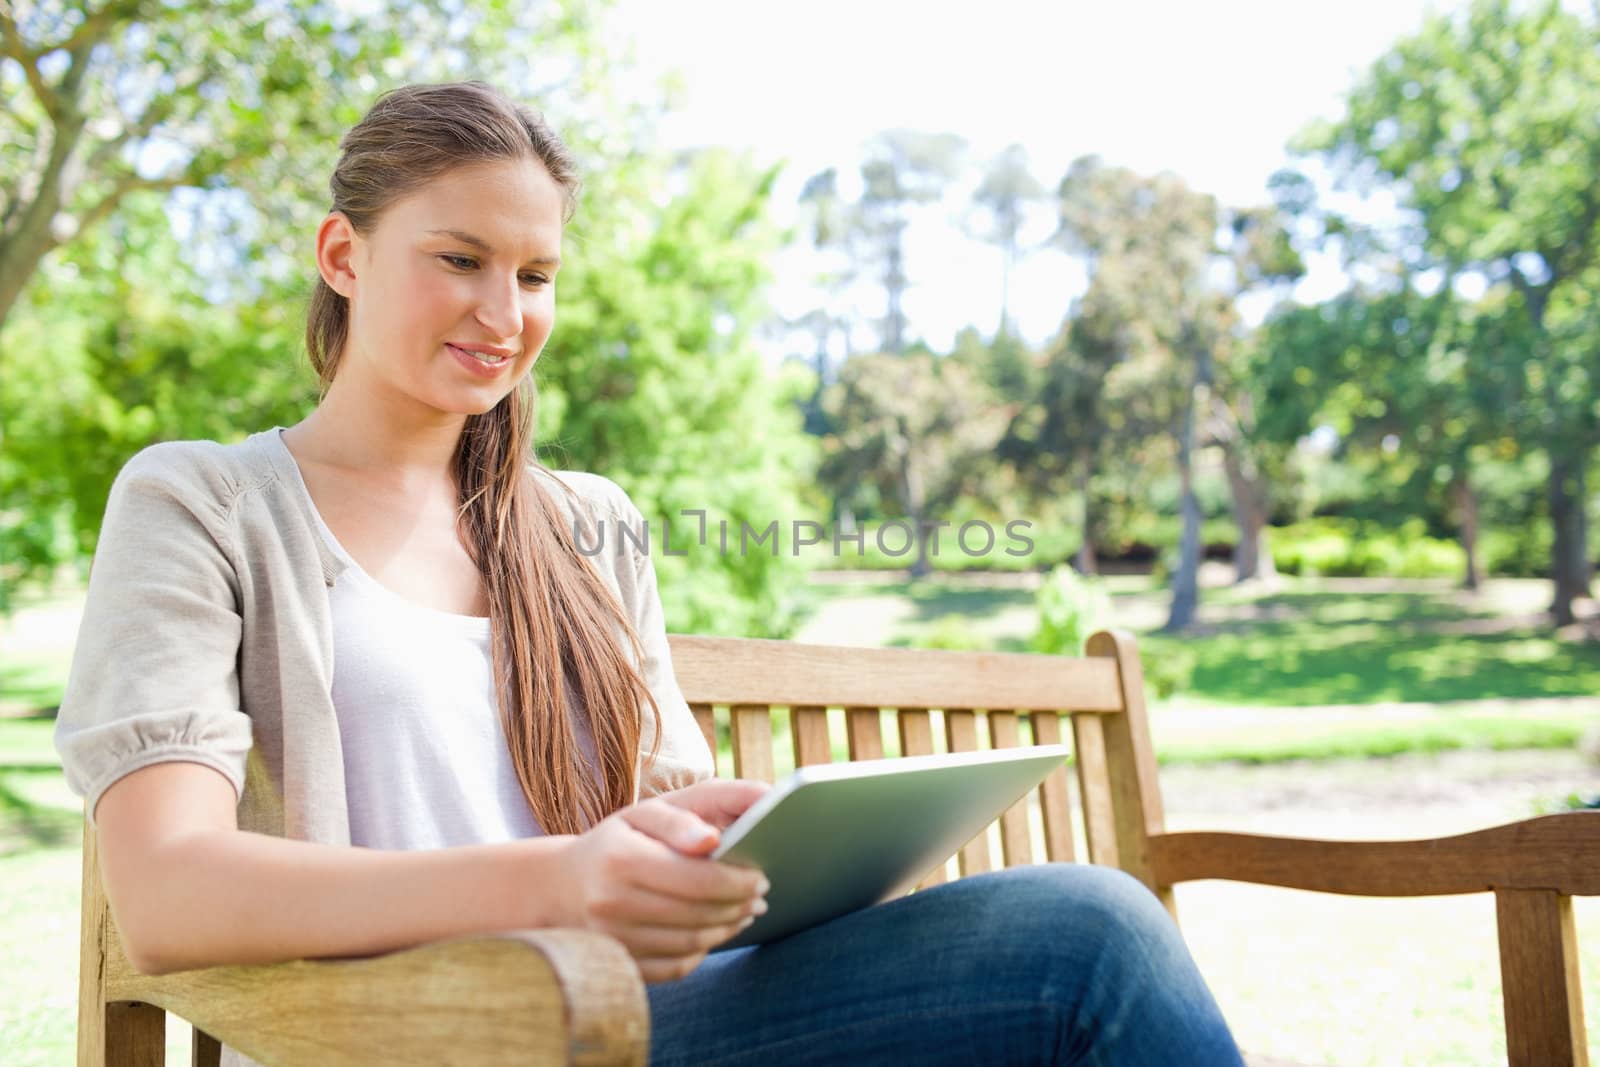 Smiling woman using a tablet on a park bench by Wavebreakmedia